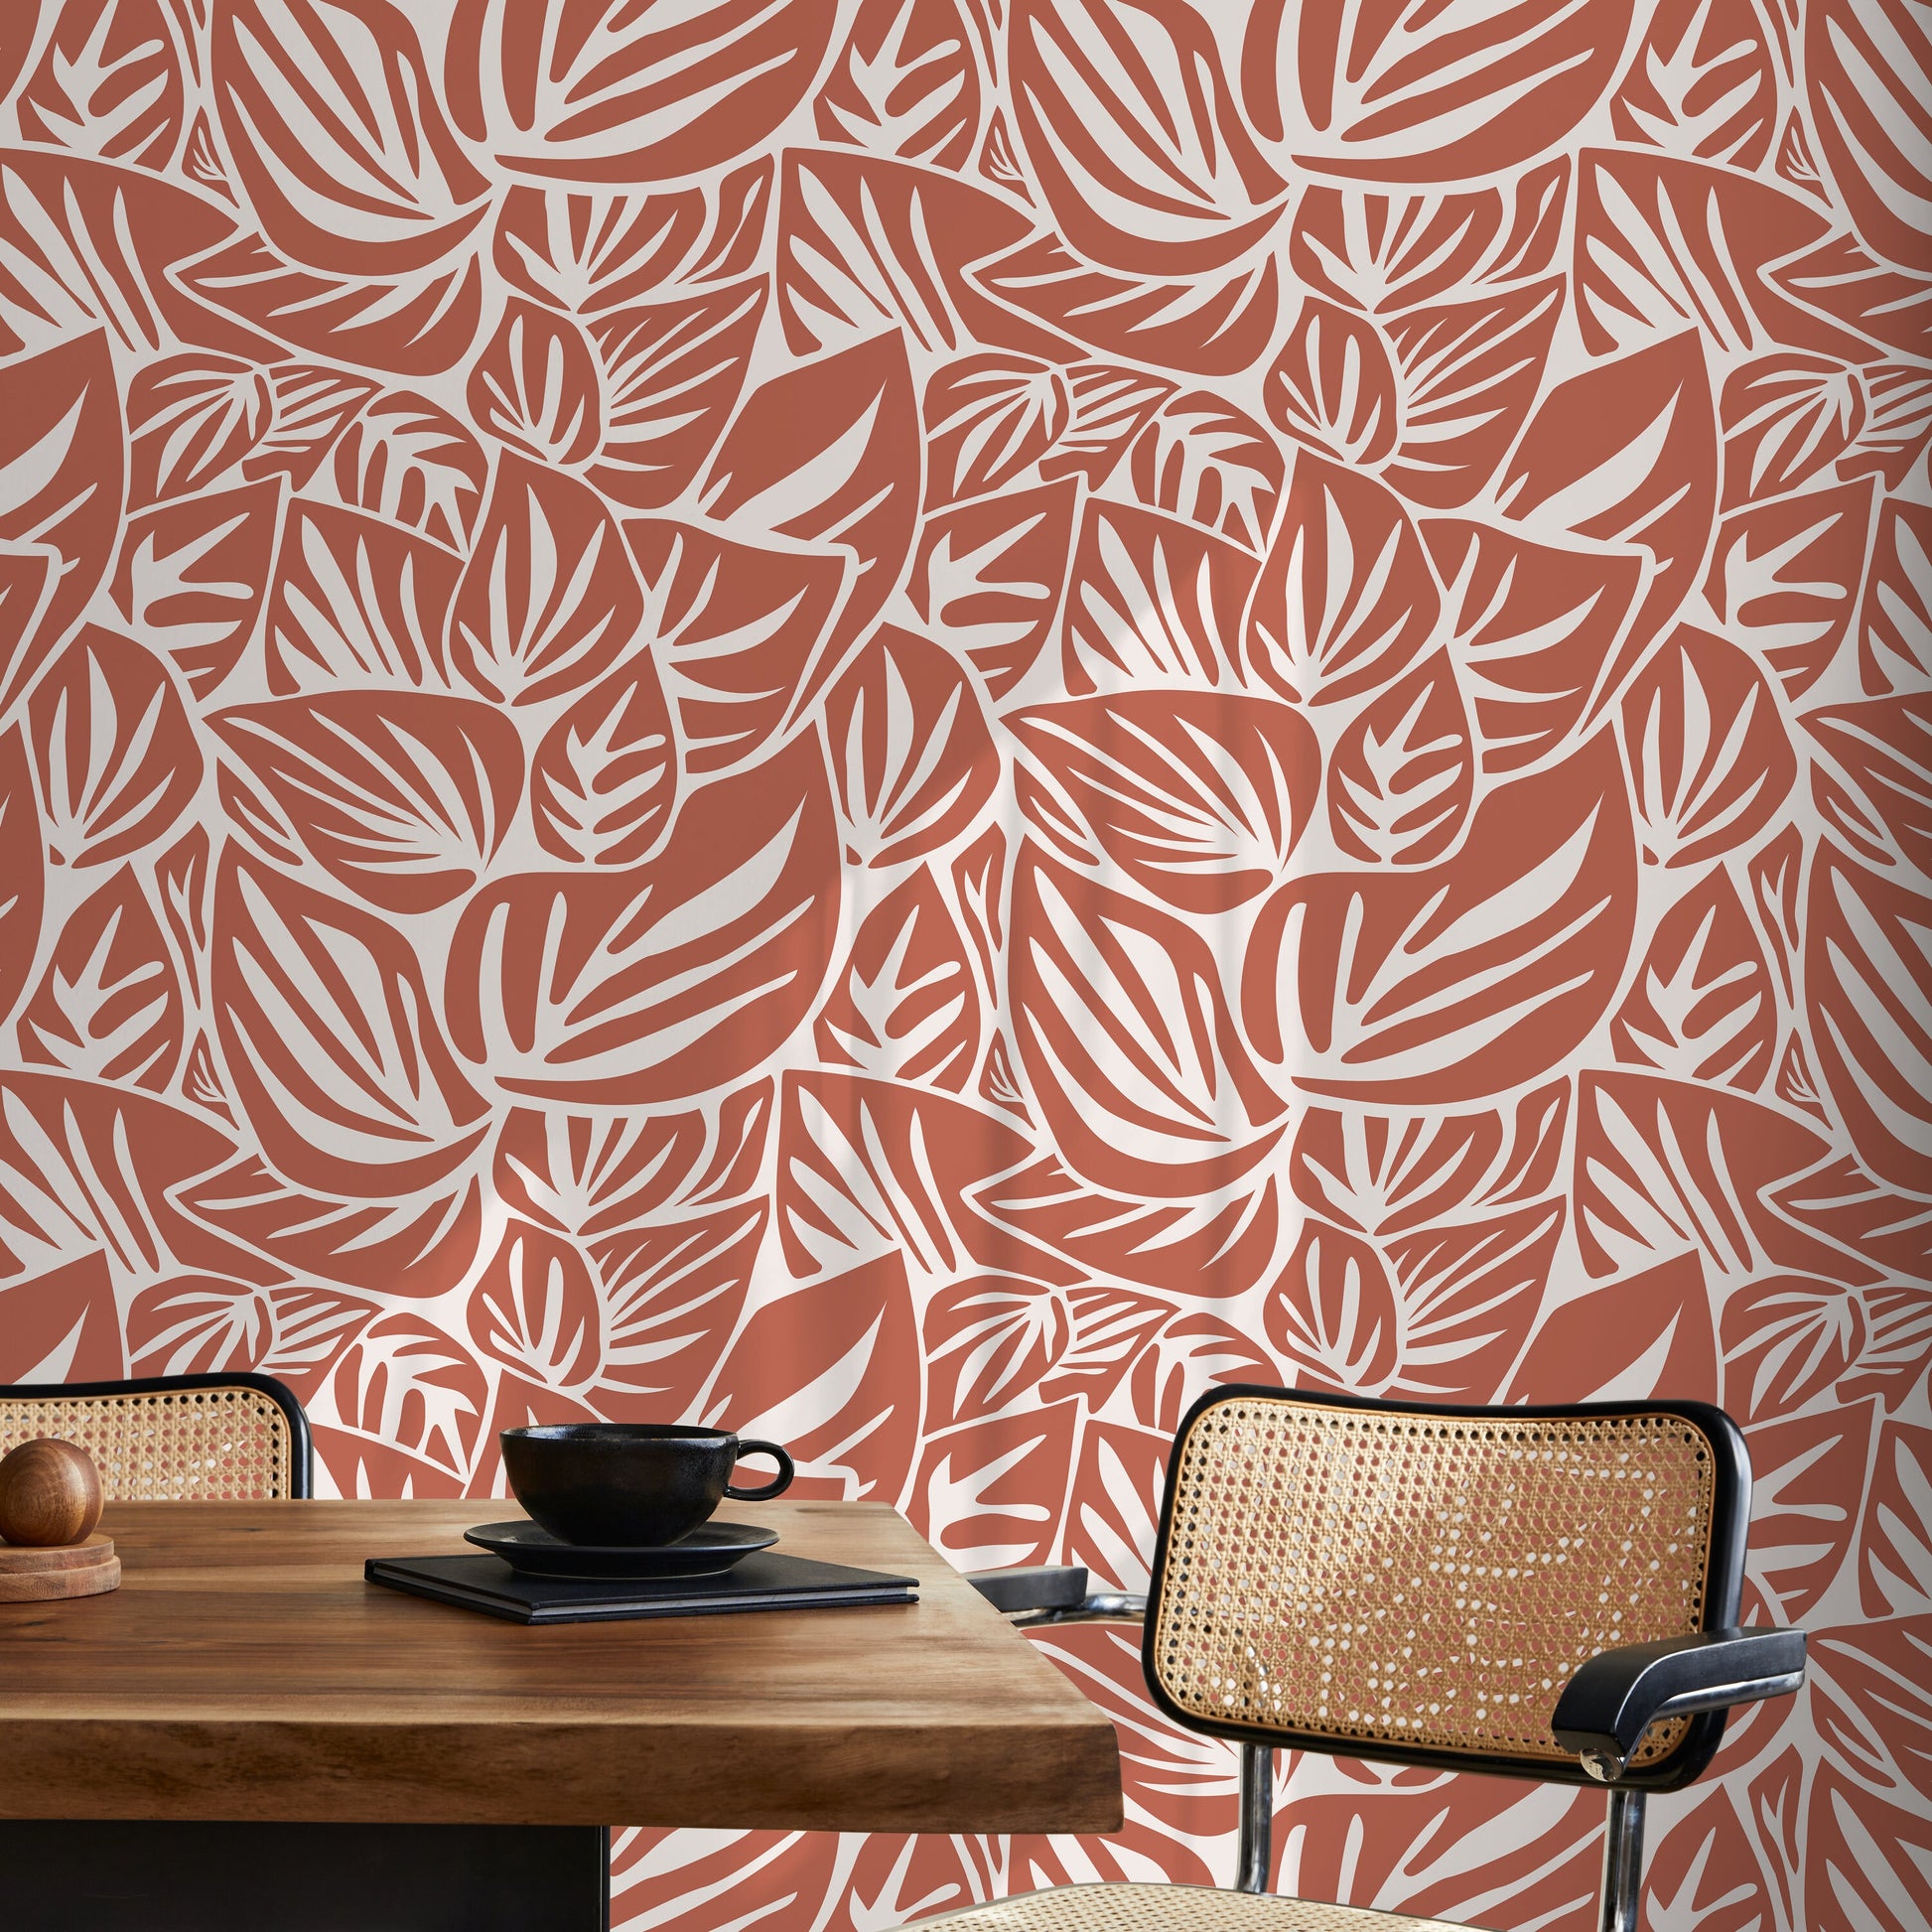 Red Leaf Wallpaper Modern Wallpaper Peel and Stick and Traditional Wallpaper - D650